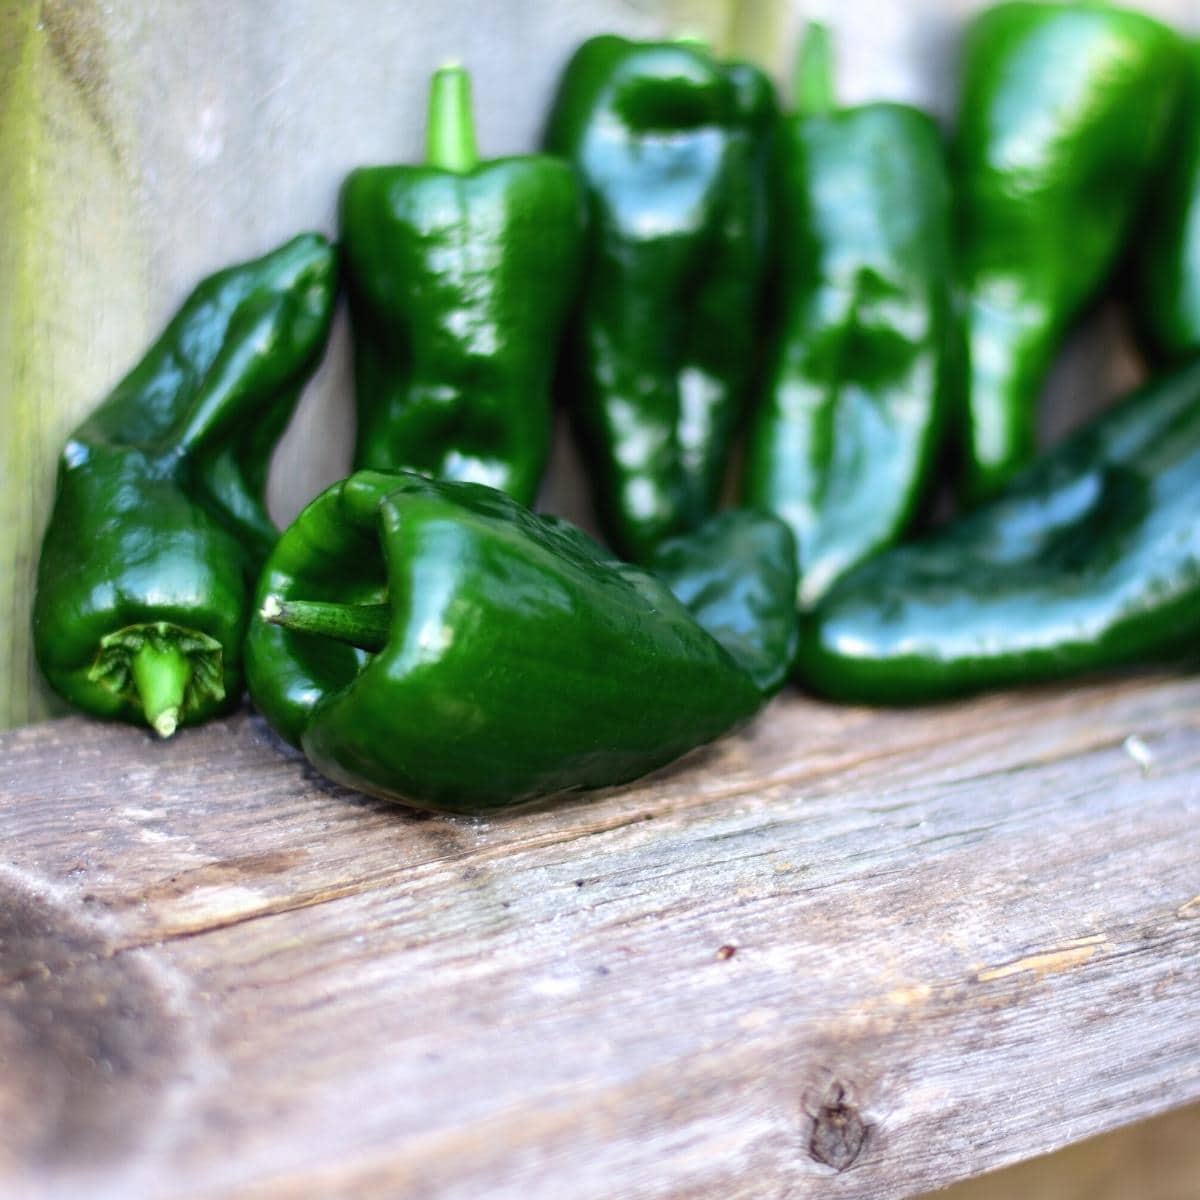 Fresh, dark green poblano peppers on a wooden table.